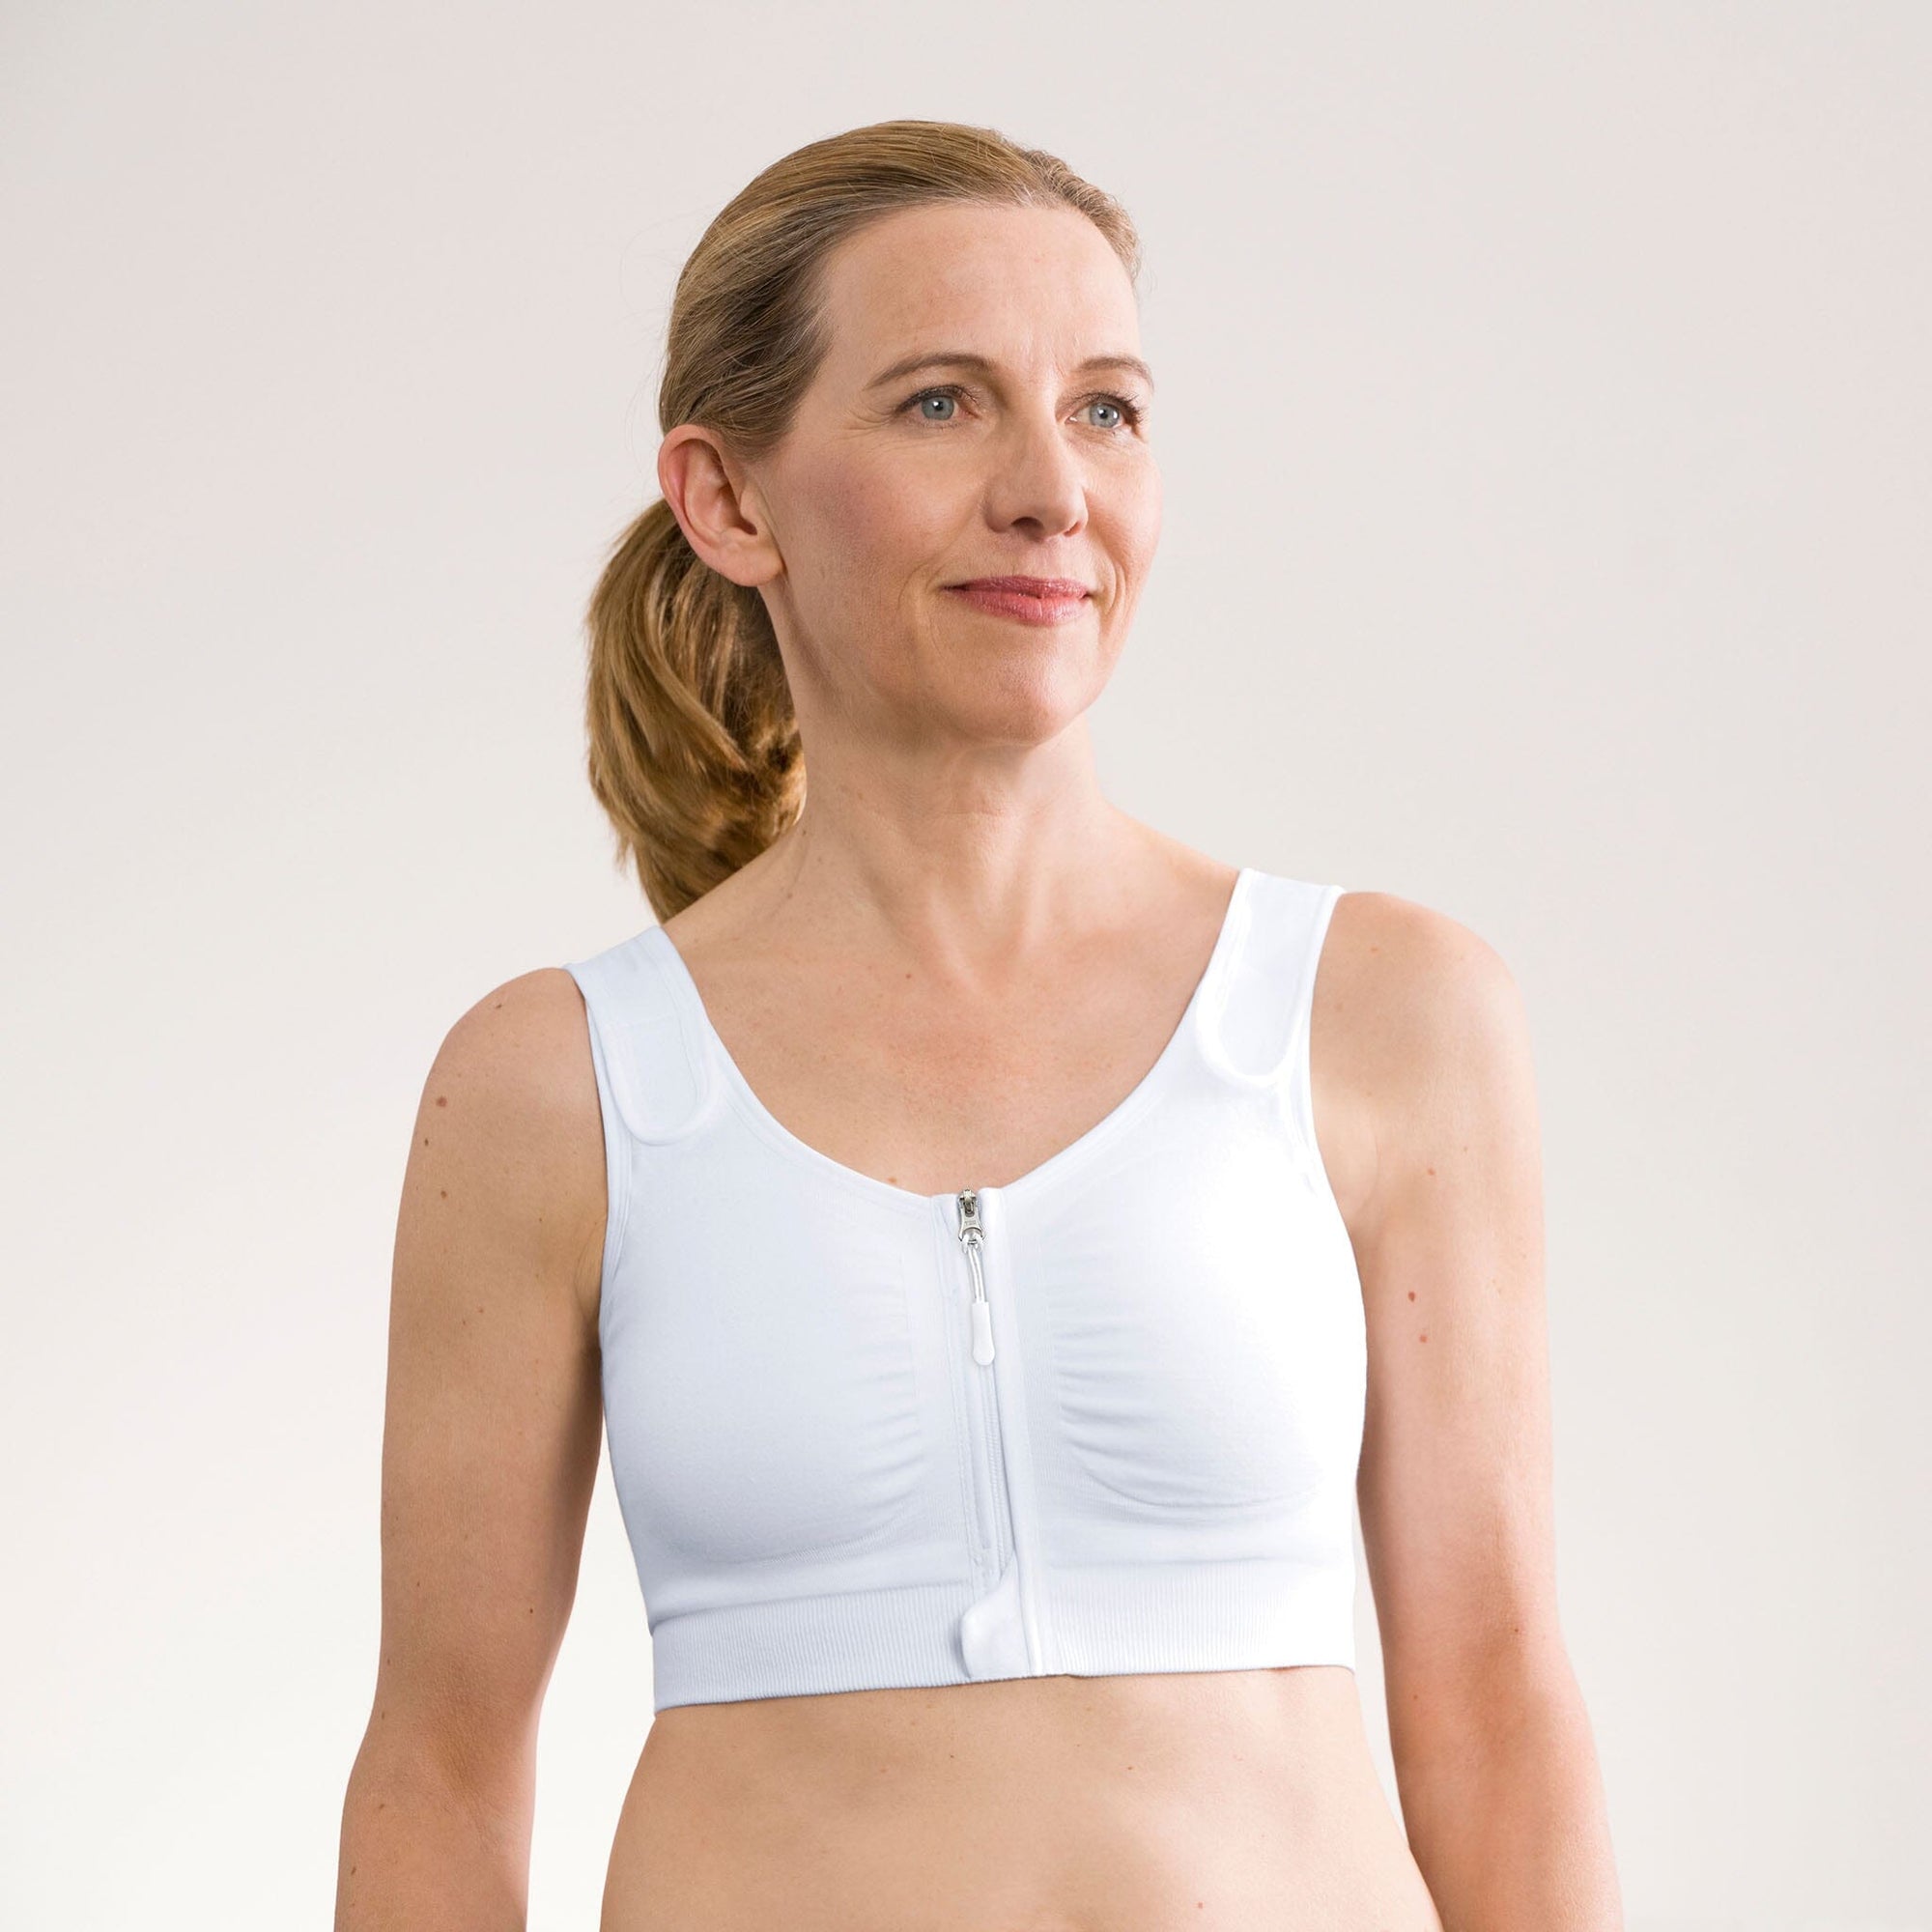 Support Softee - Post Surgical Bra/Camisole